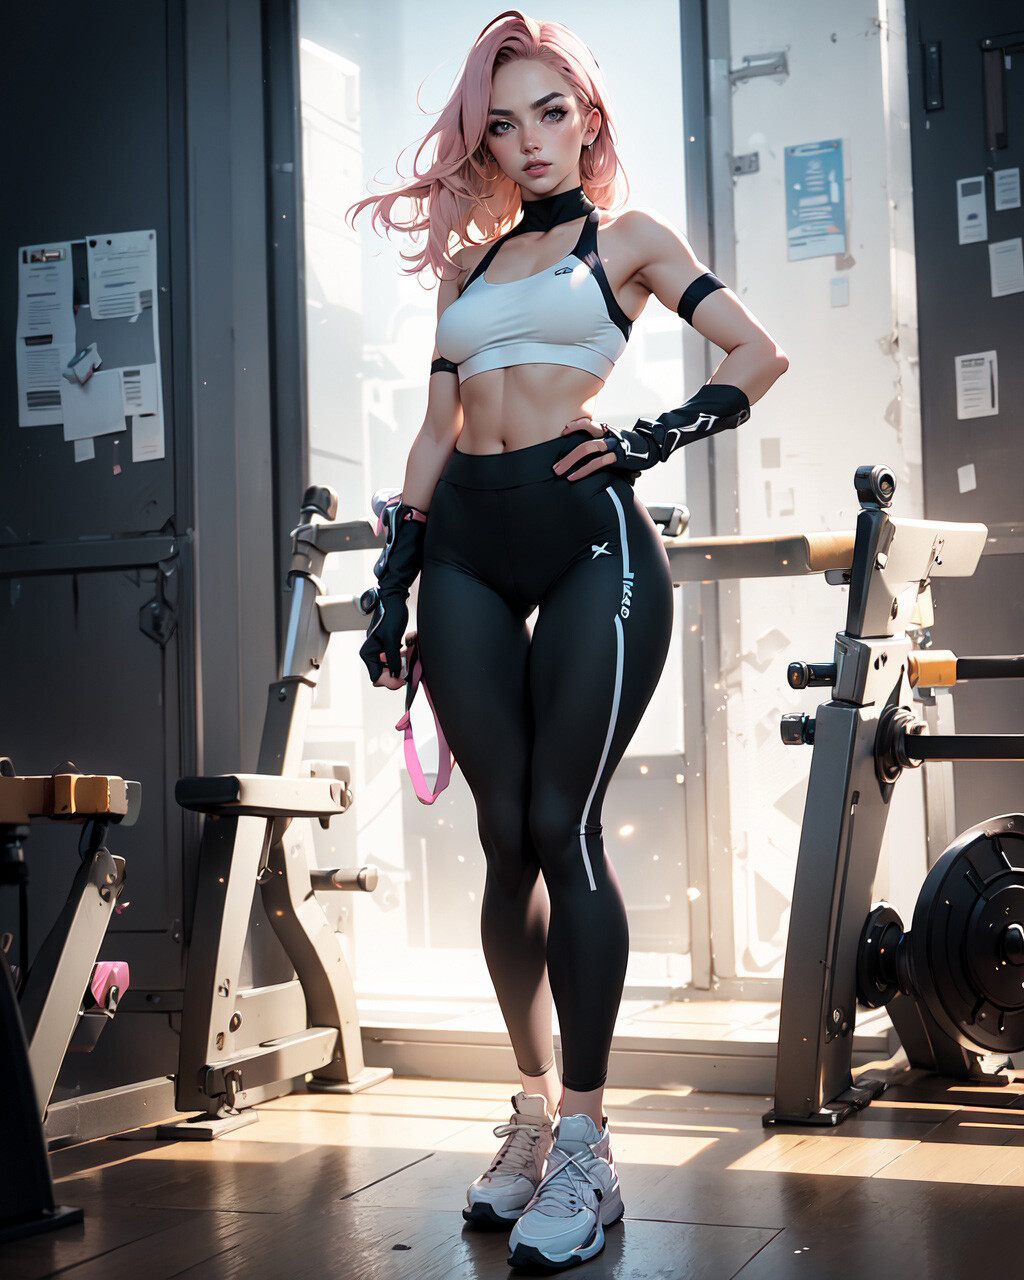 ArtStation - 200 Gym Fitness Beauties, 4K Reference Art Collection, Inspiring Workout Inspiration